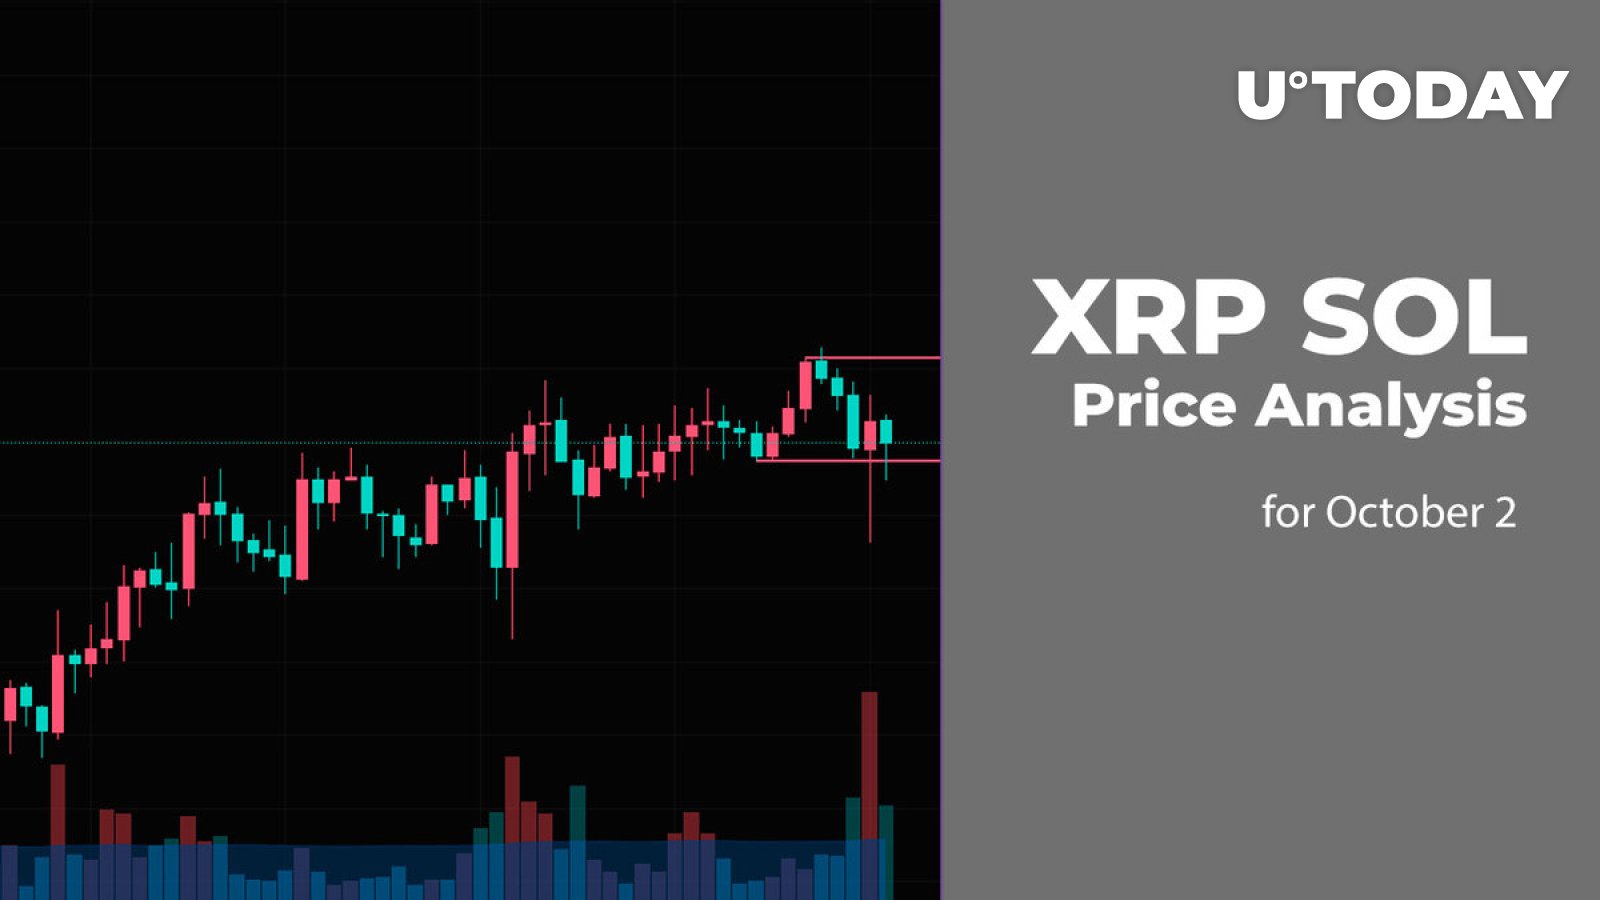 XRP and SOL Price Analysis for October 2